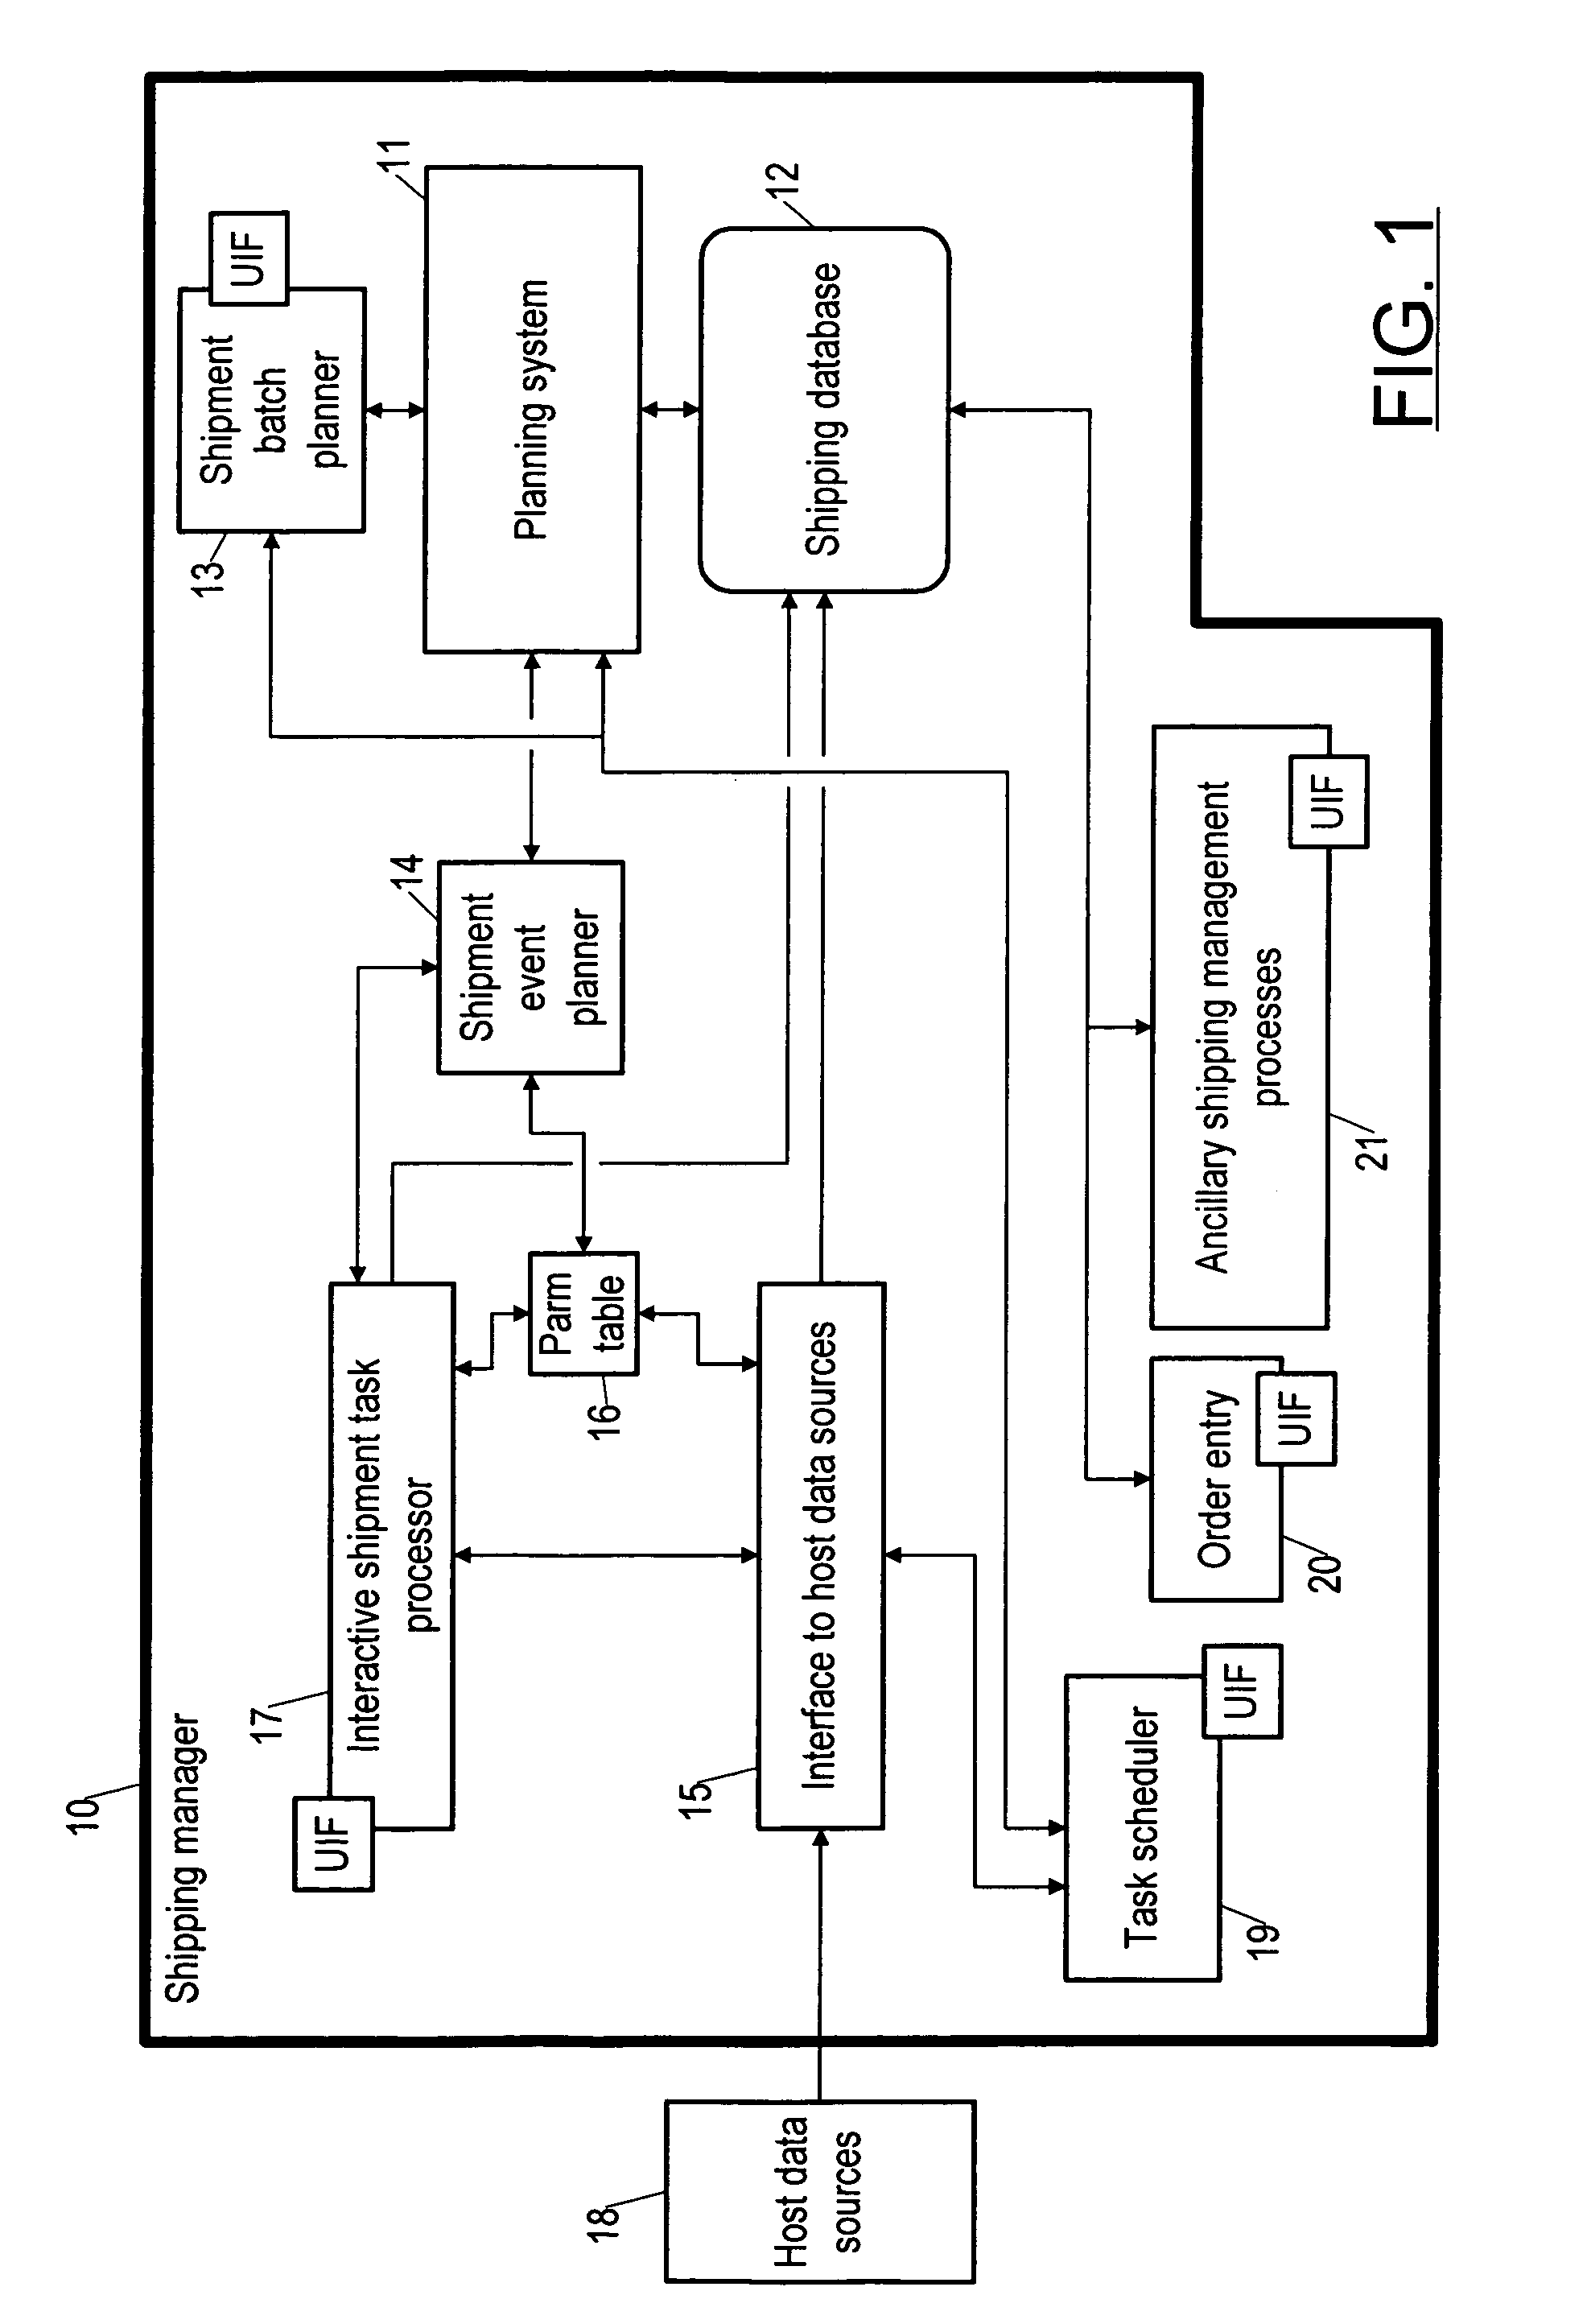 Planning engine for a parcel shipping system